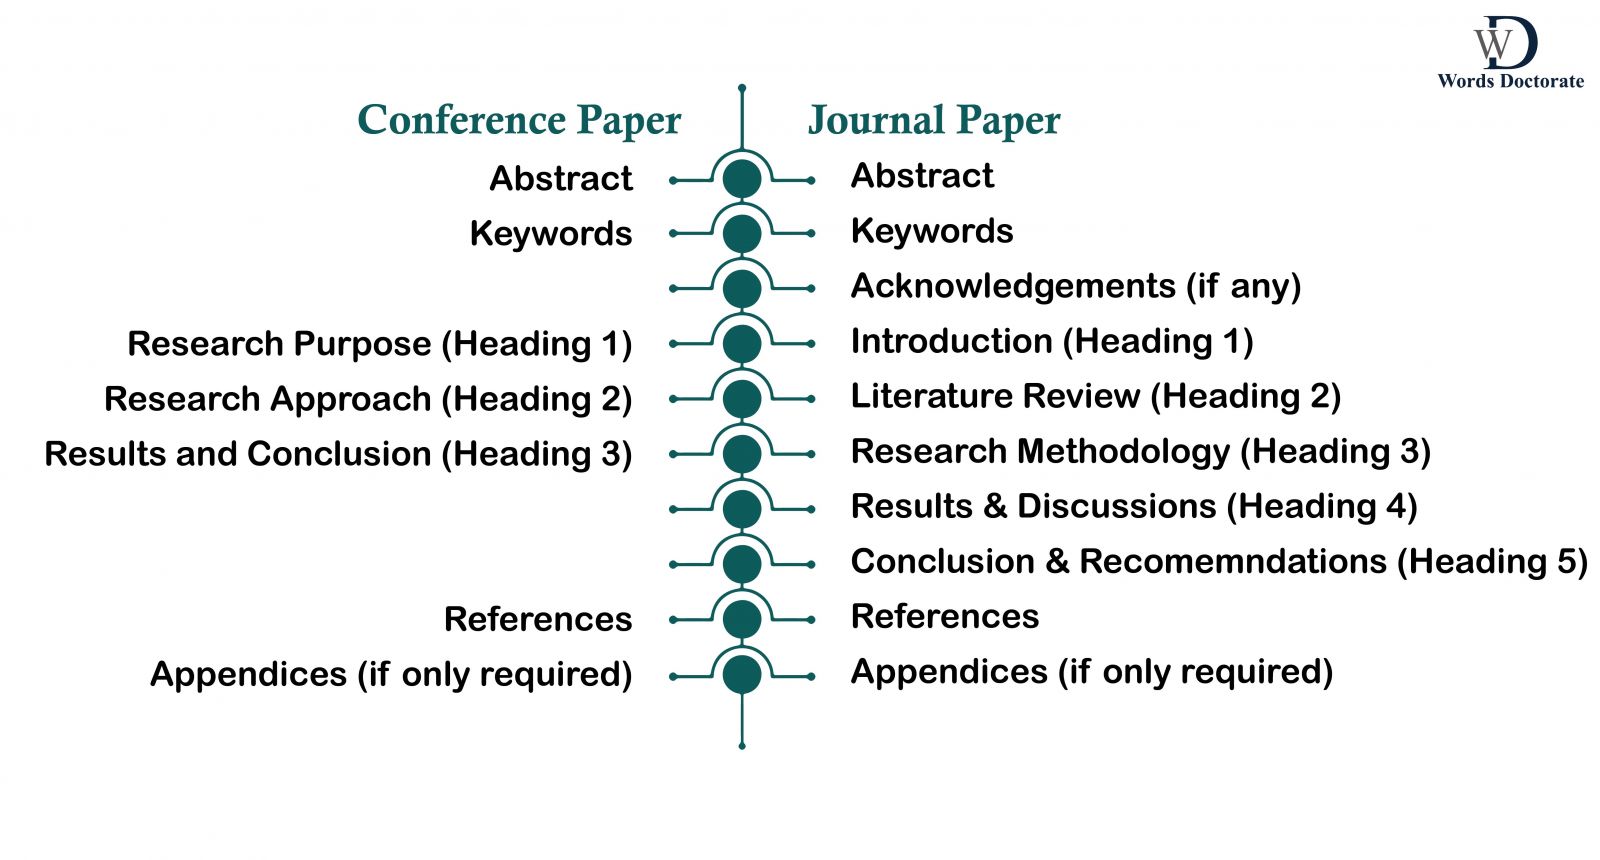 Format and Citation - Difference between Conference Paper and Journal Paper